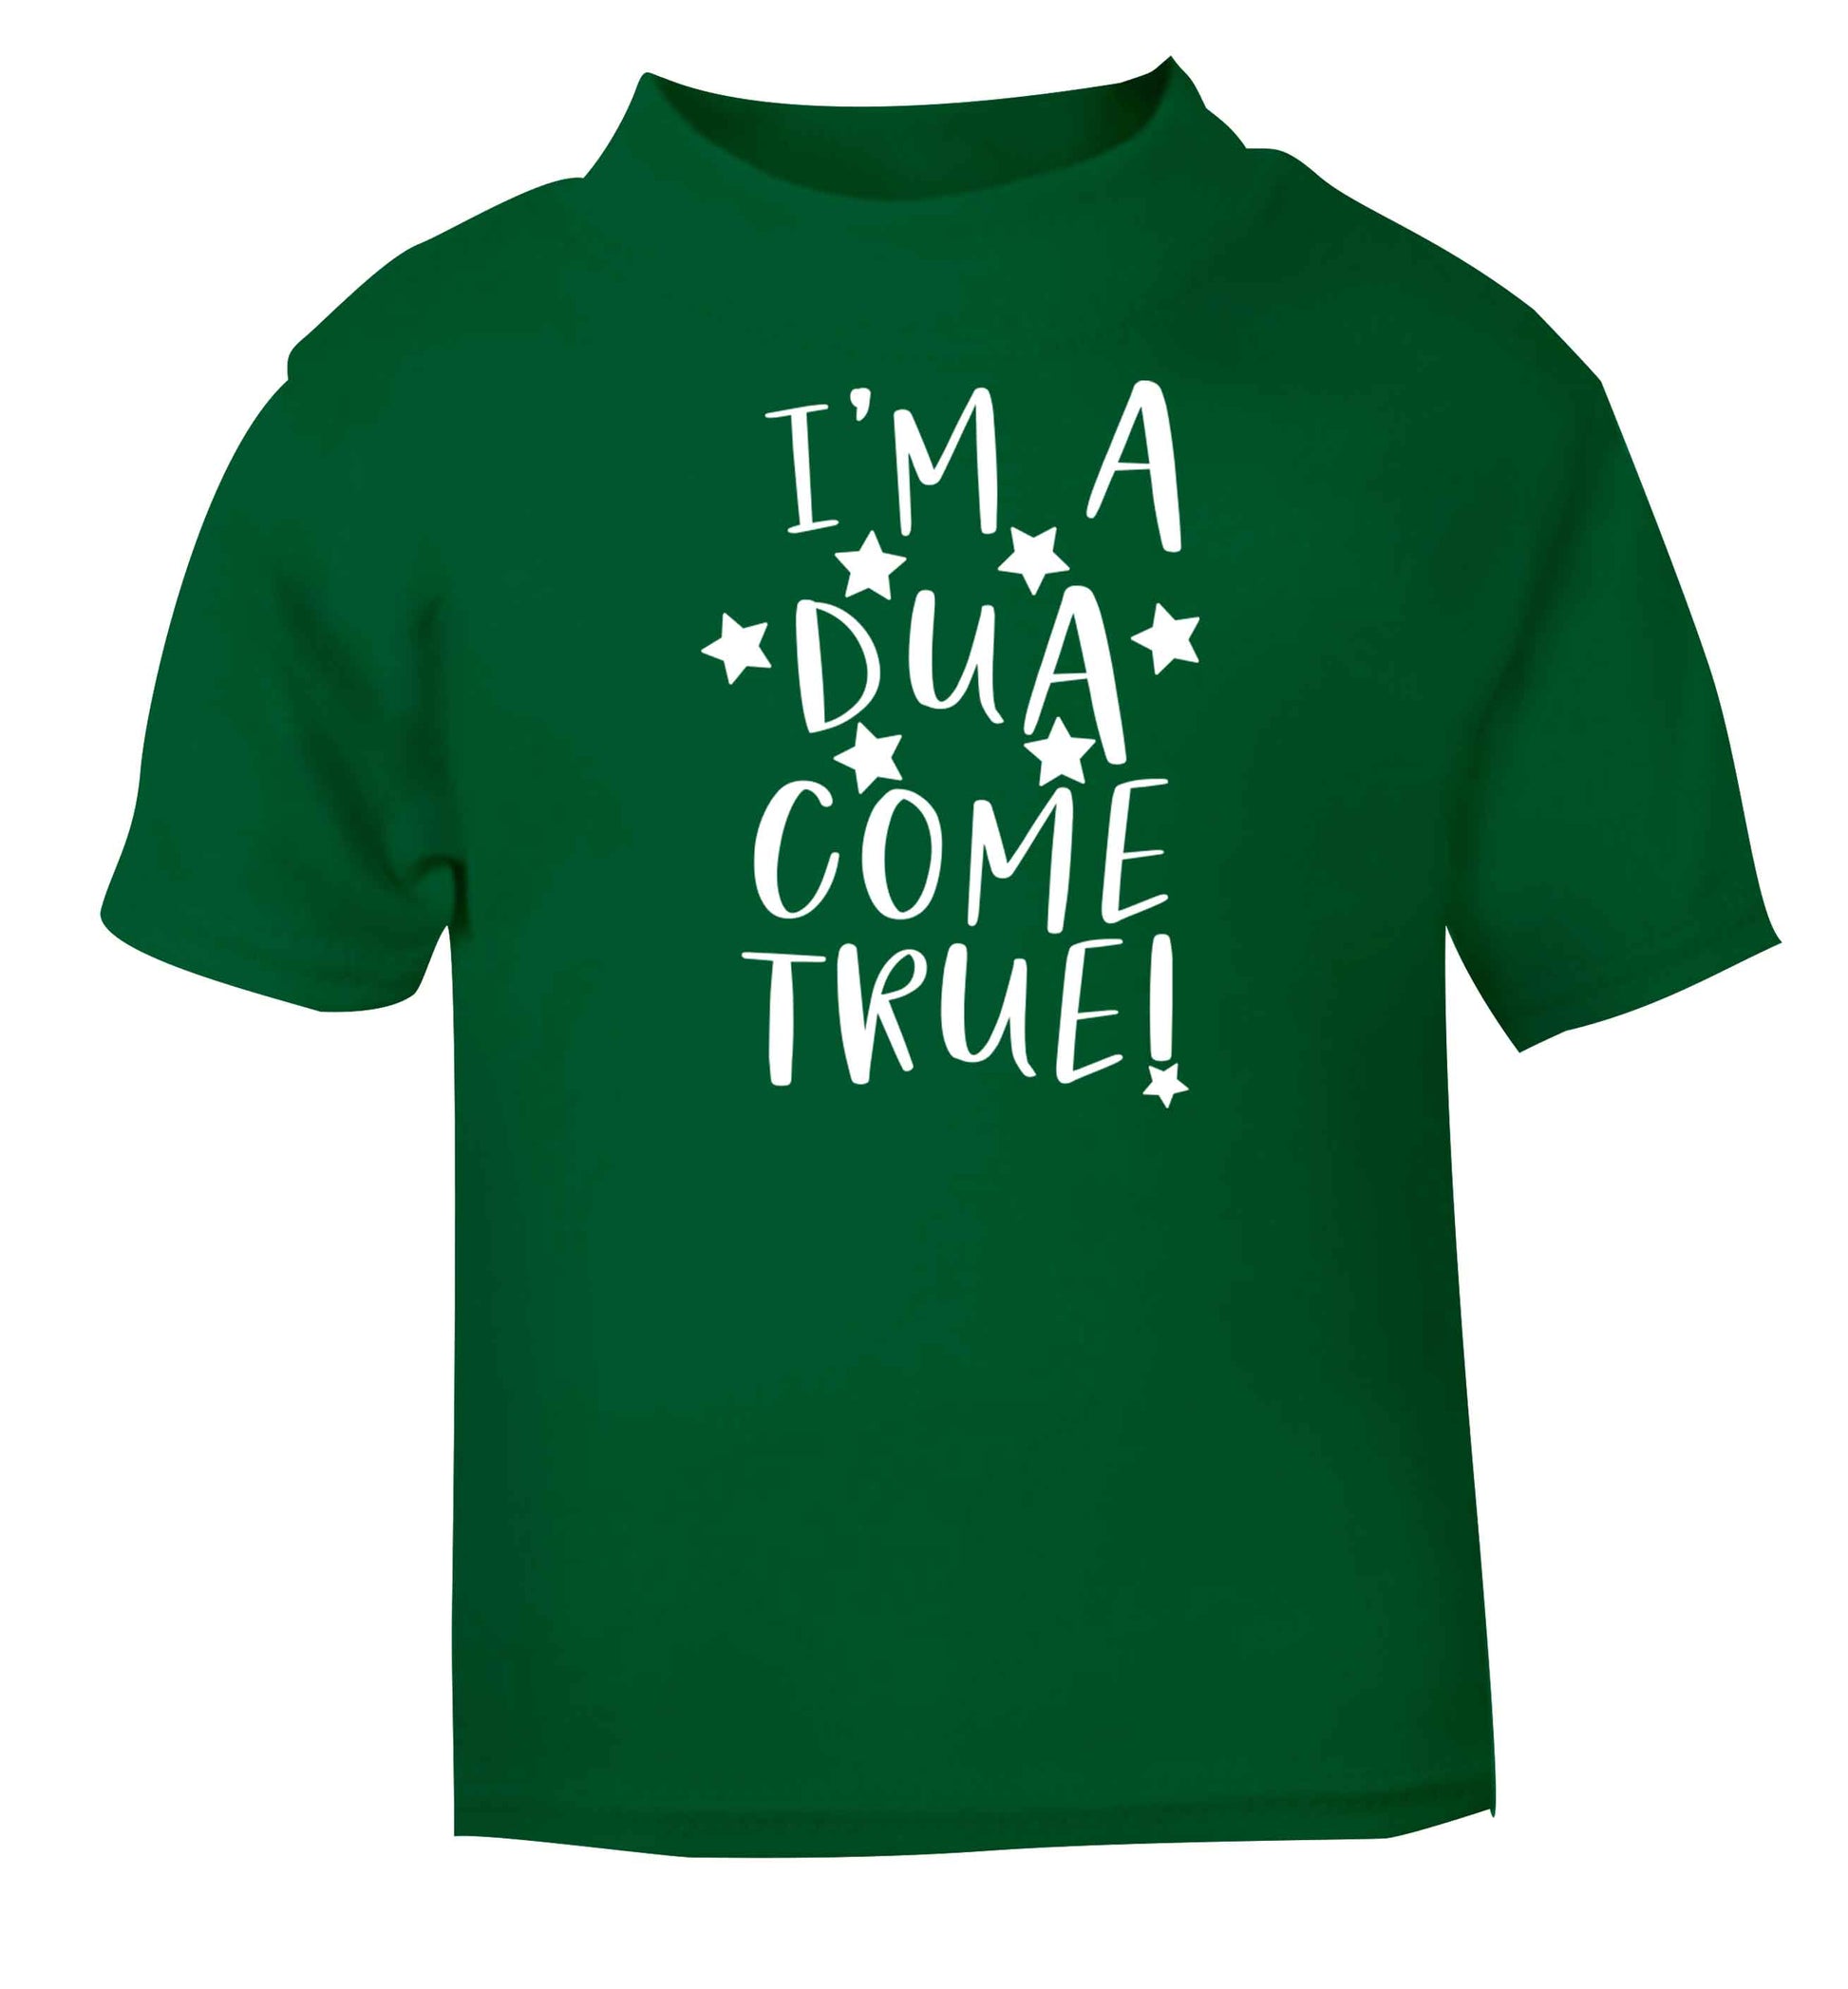 I'm a dua come true green baby toddler Tshirt 2 Years